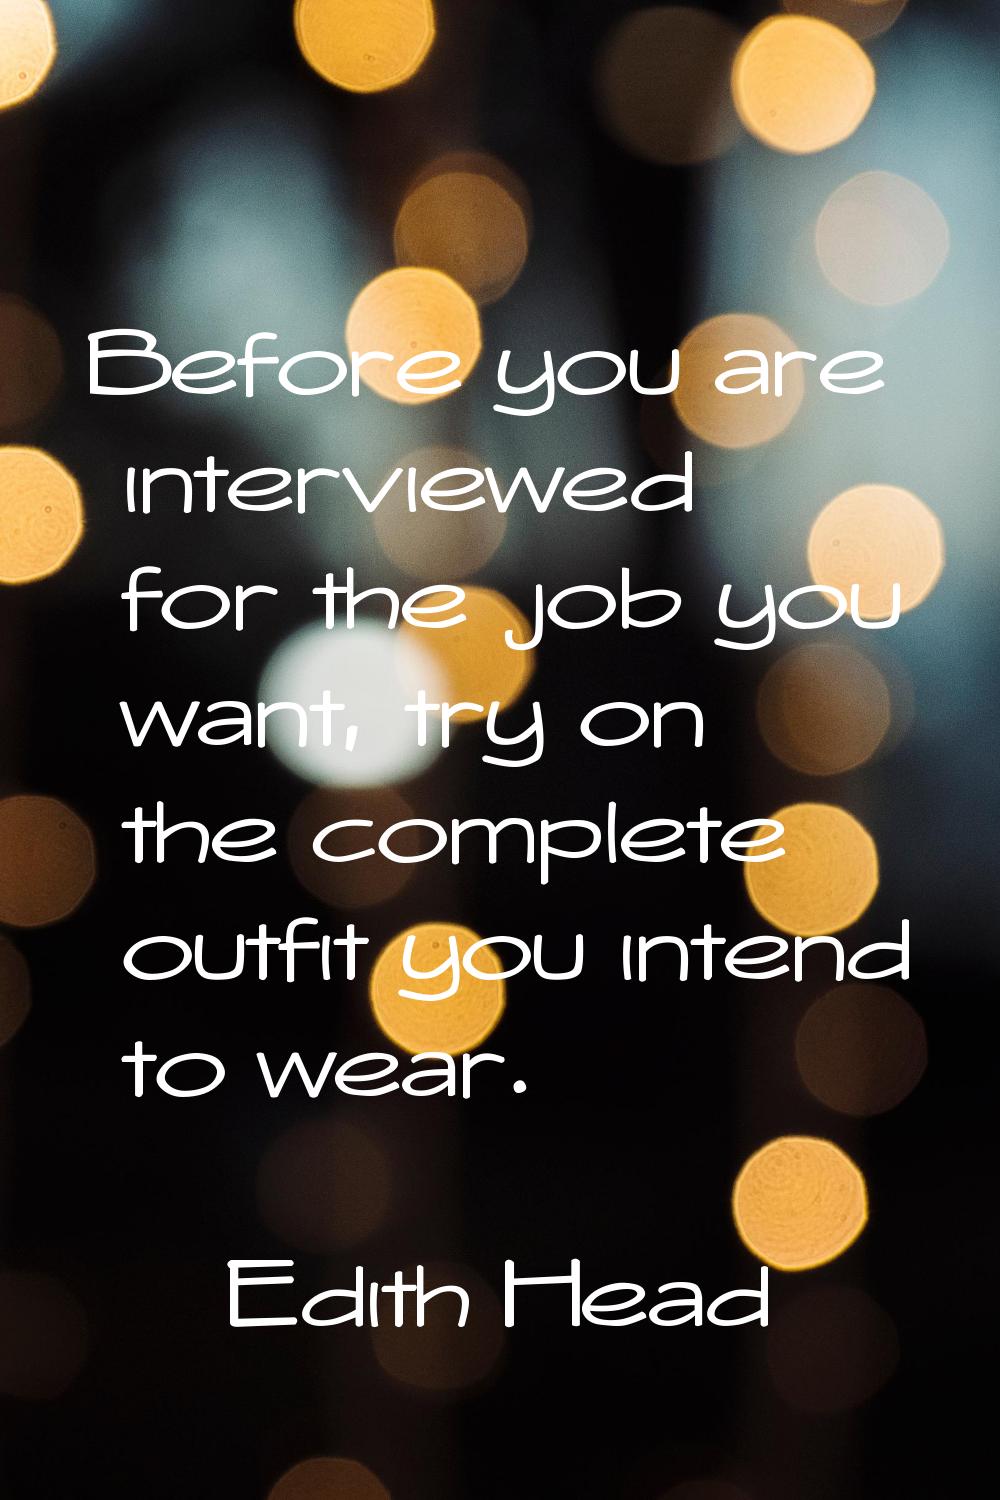 Before you are interviewed for the job you want, try on the complete outfit you intend to wear.